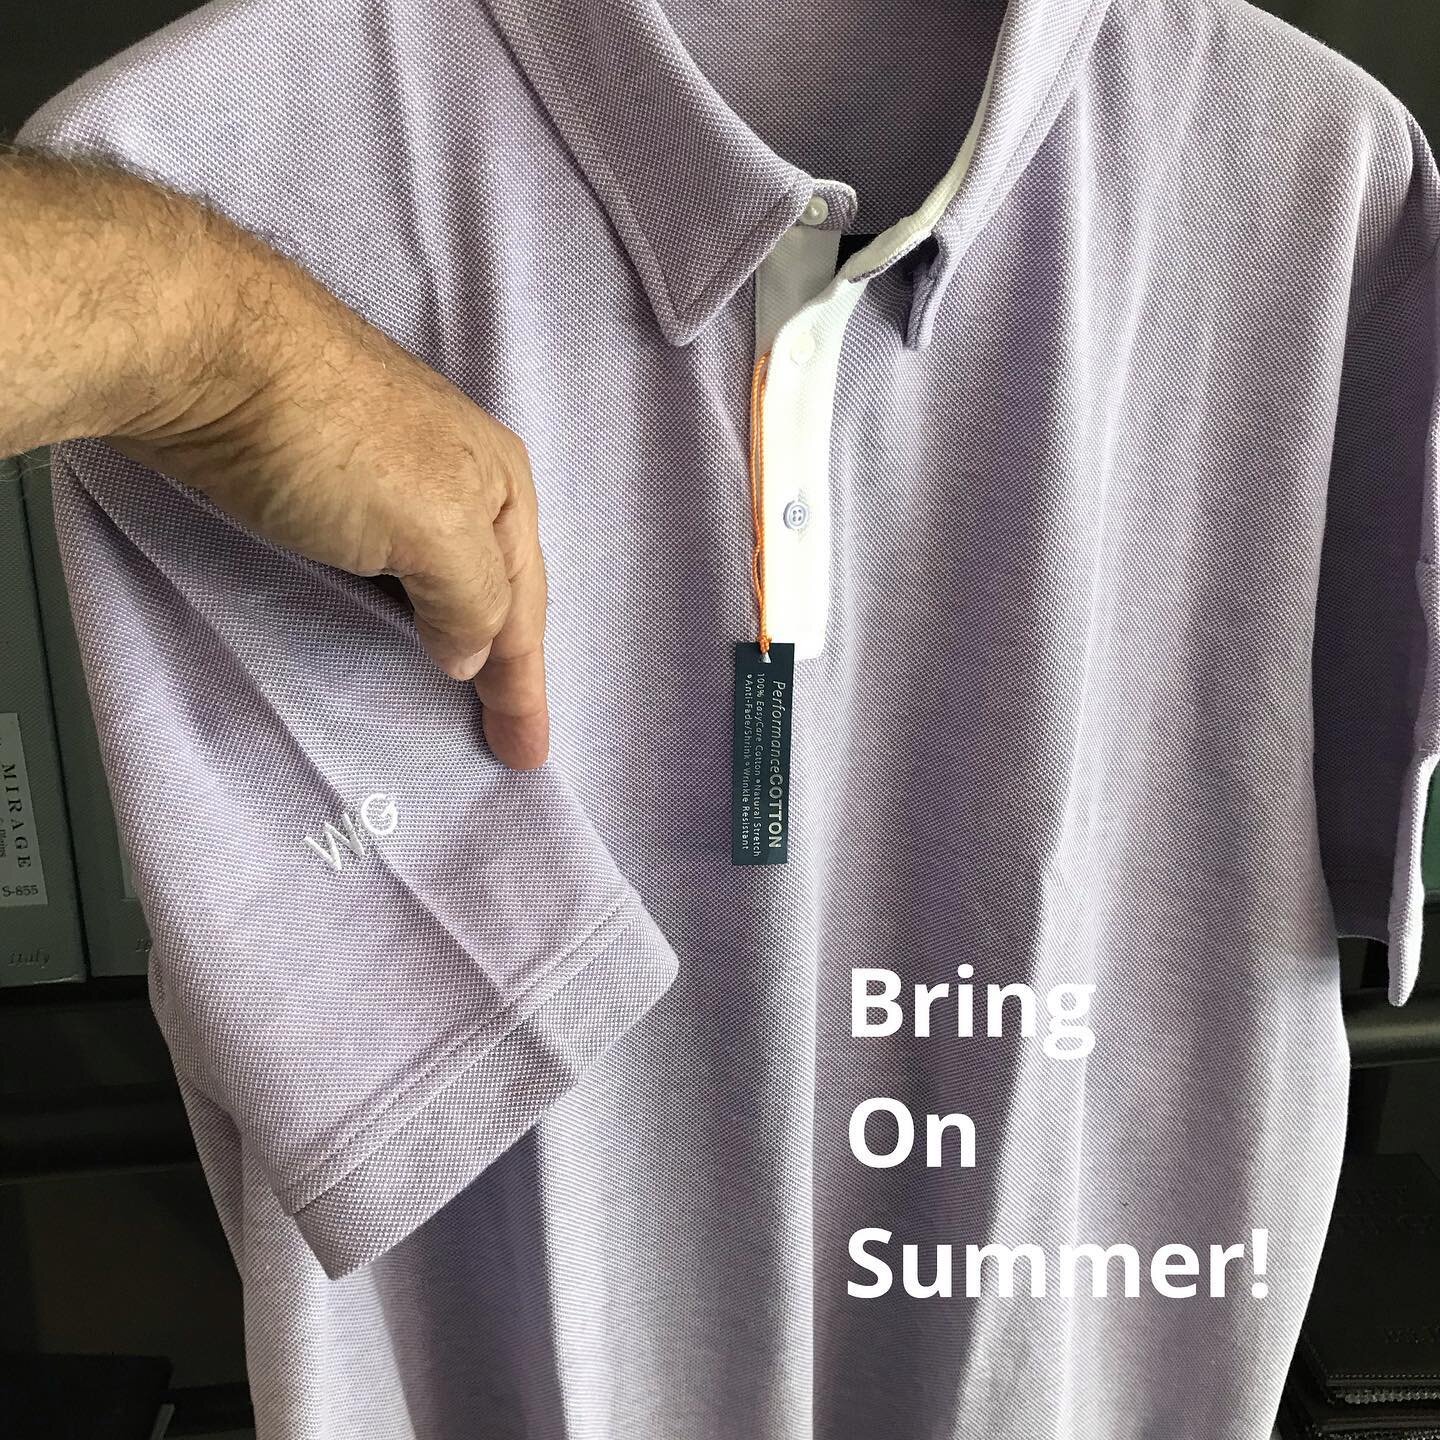 Custom made polos are great for summer.  #wayneedwards #golf #sizeisnotaproblem